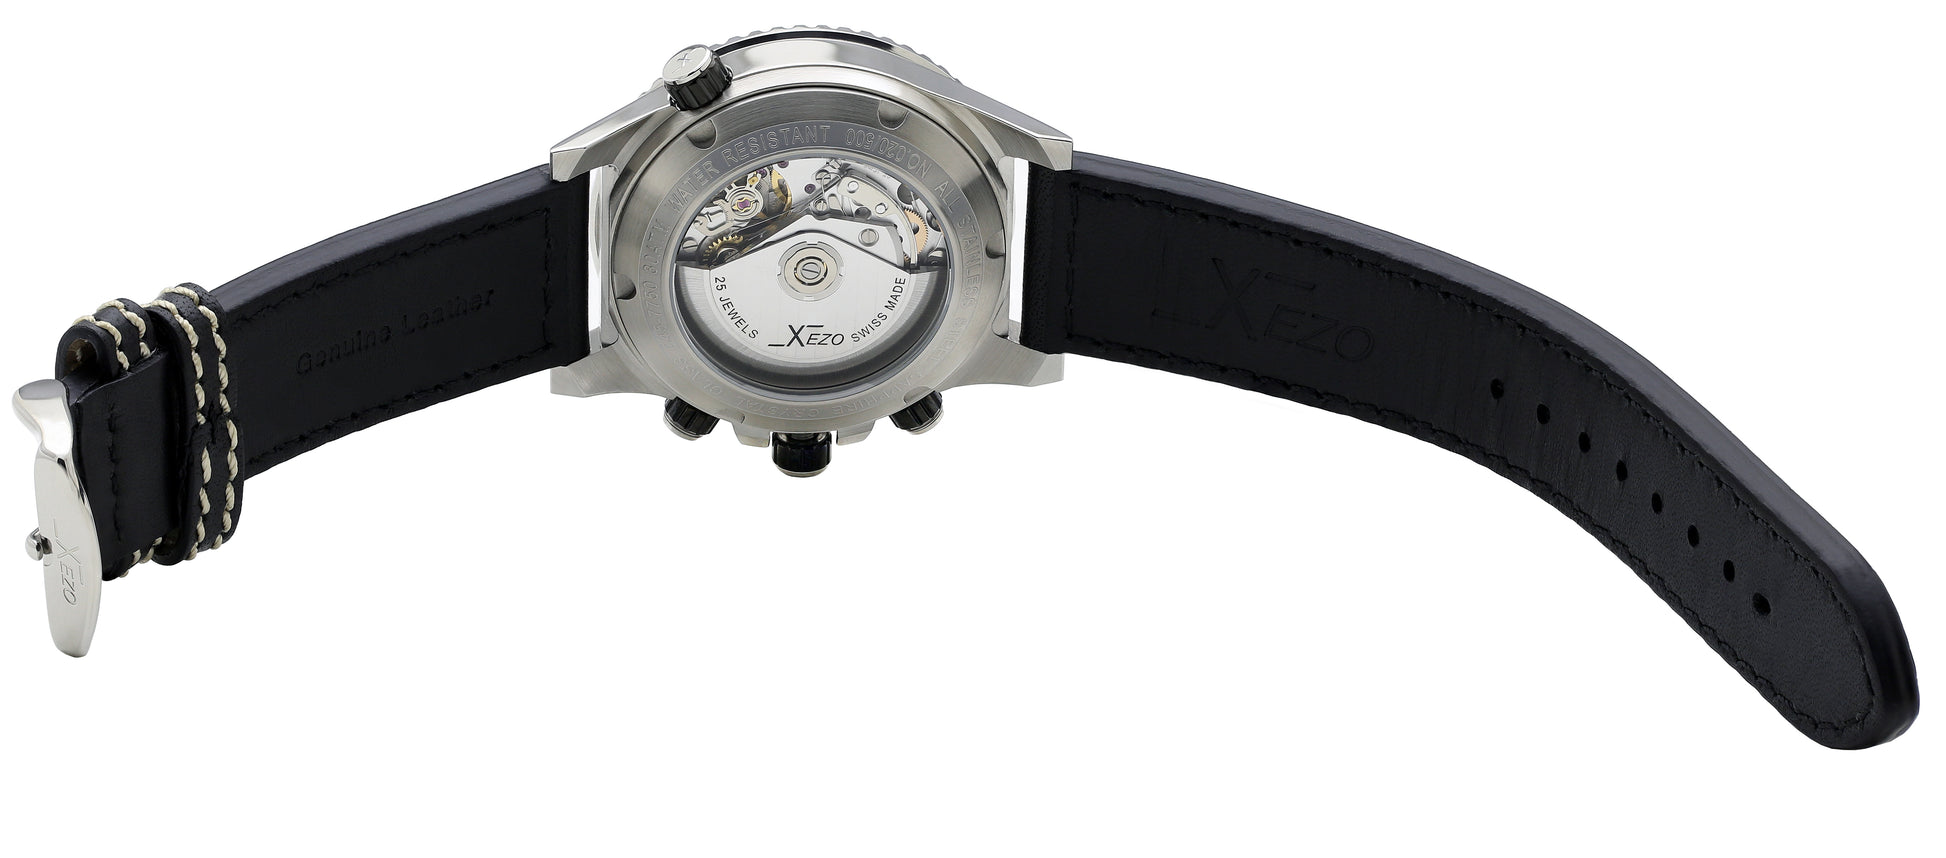 Xezo - Back overview of the Air Commando D45 7750-1 watch with black leather strap